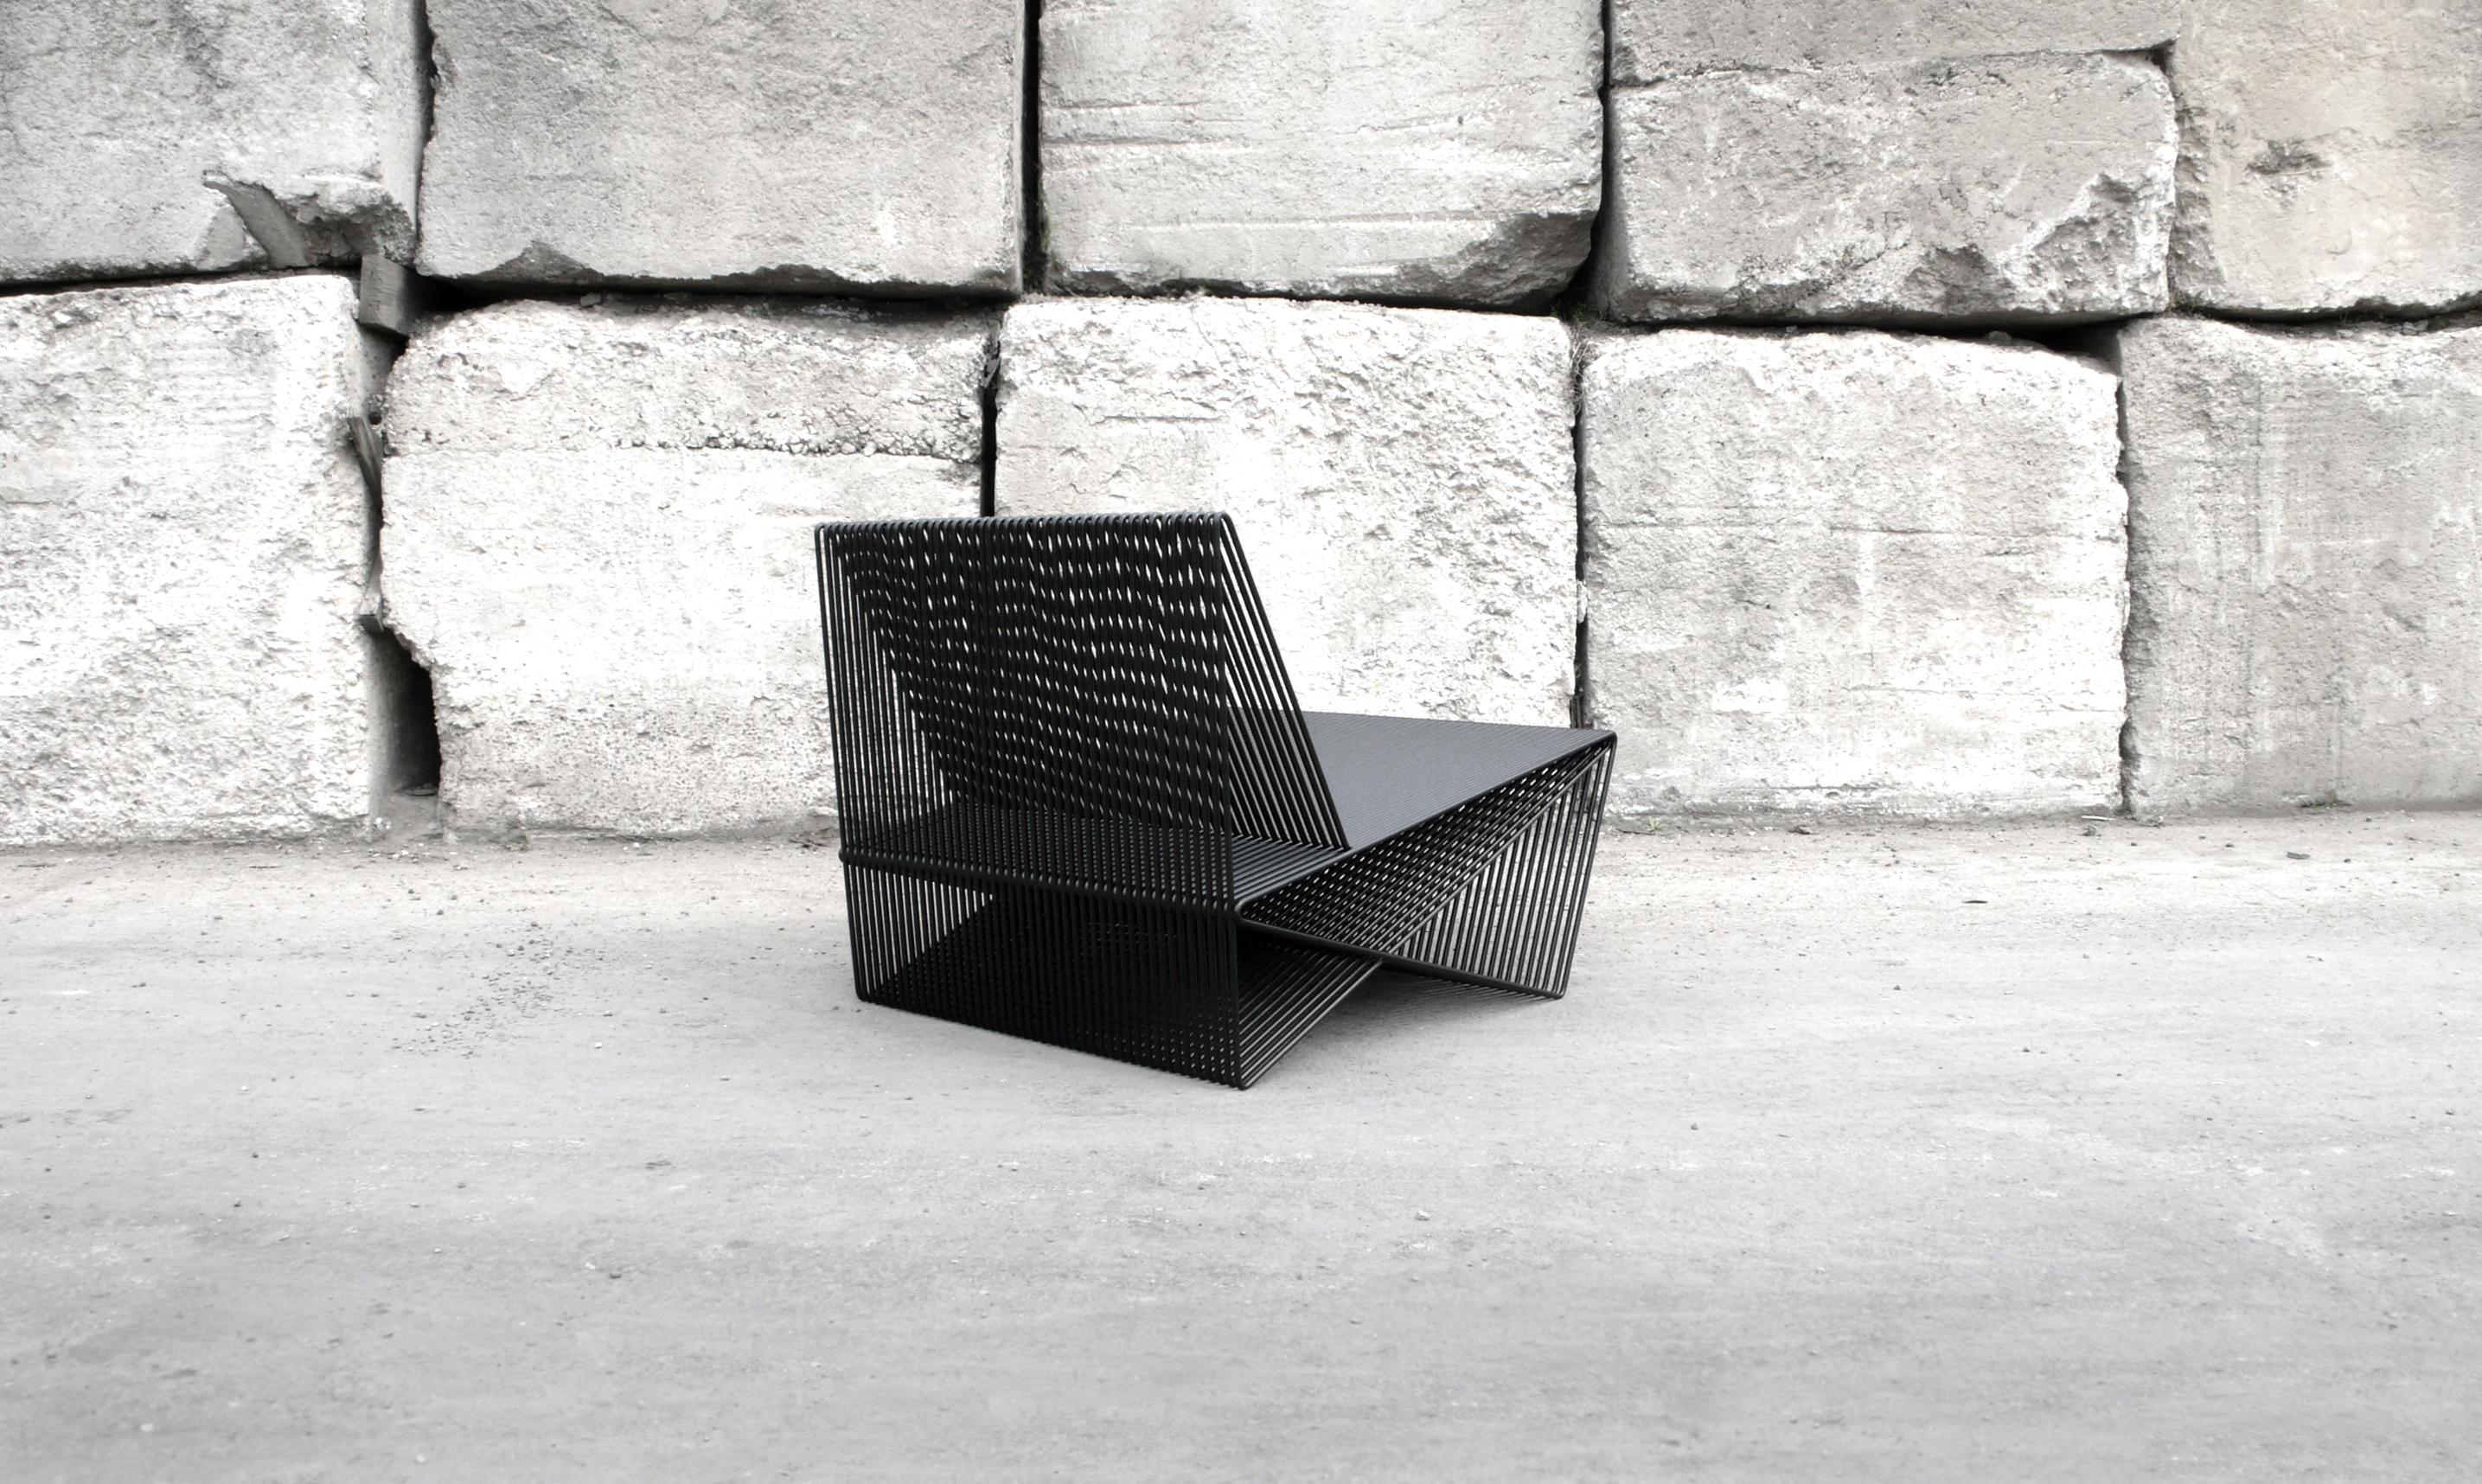 Minimalist CIRCUIT - Contemporary Minimal Geometric Steel Rod Lounge Chair by TJOKEEFE For Sale